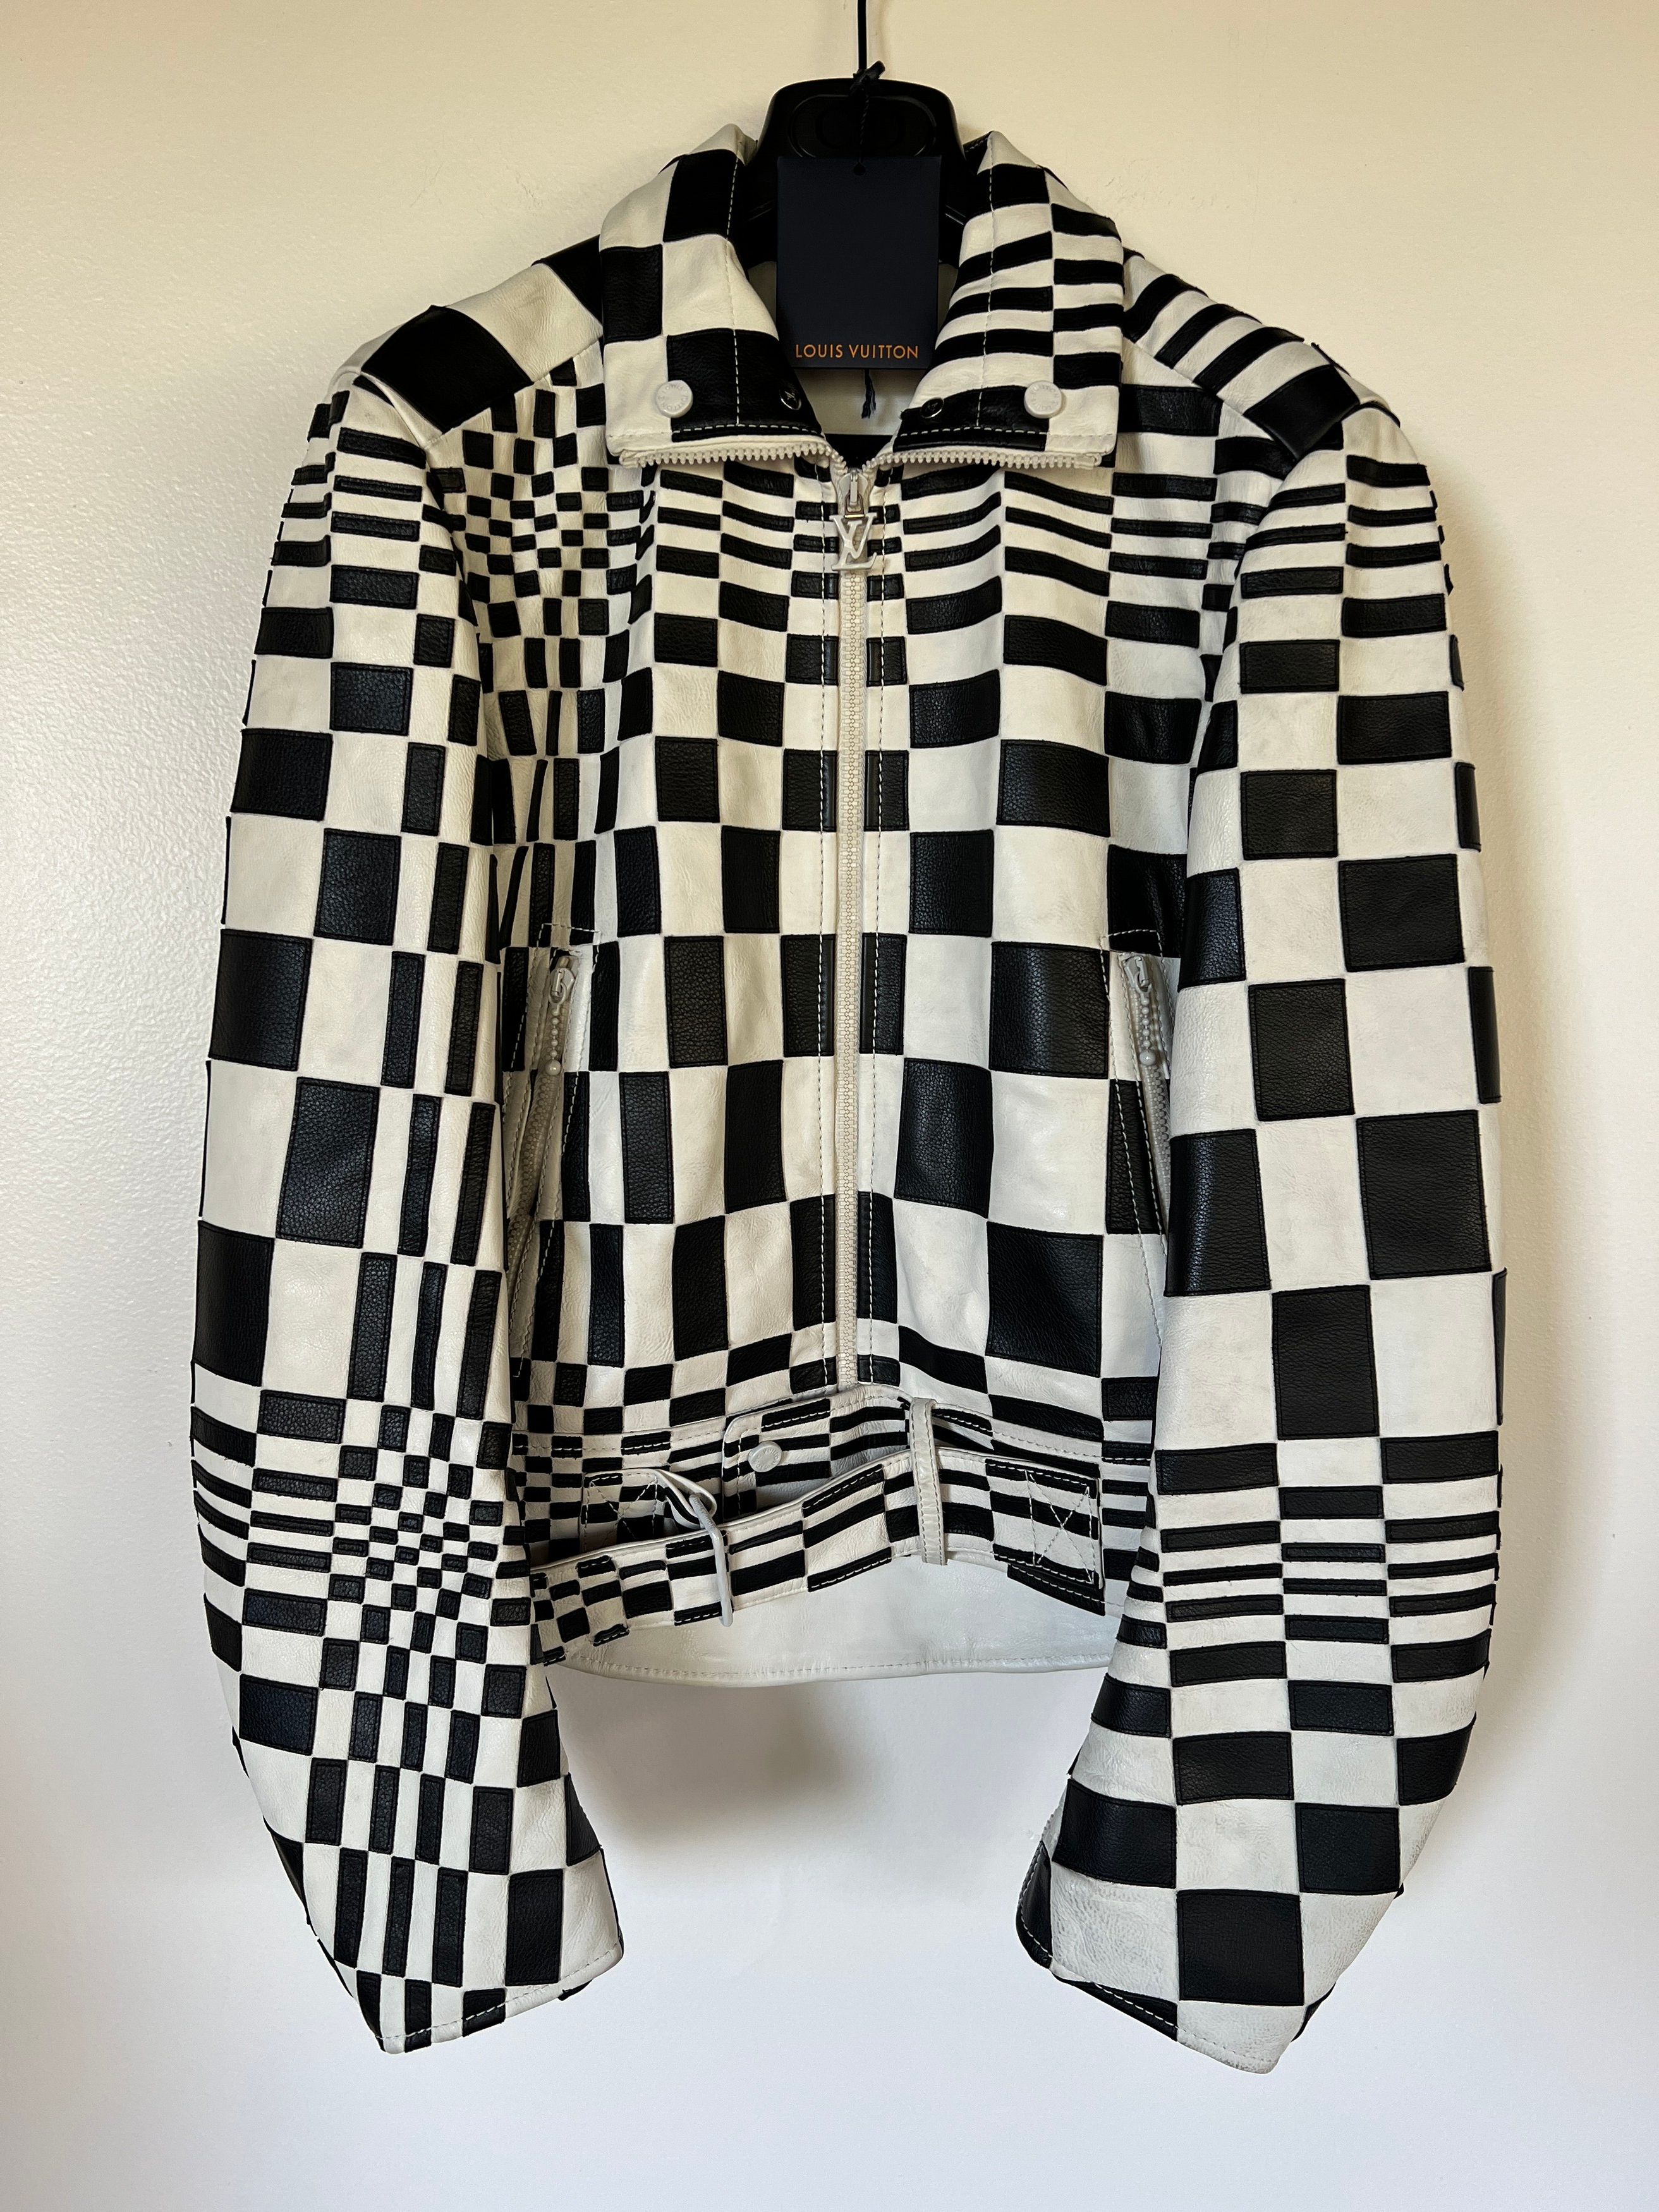 Pre-owned Louis Vuitton X Virgil Abloh Ss21 Runway Checker Patchwork Leather Biker Jacket Size 46 In Black/white